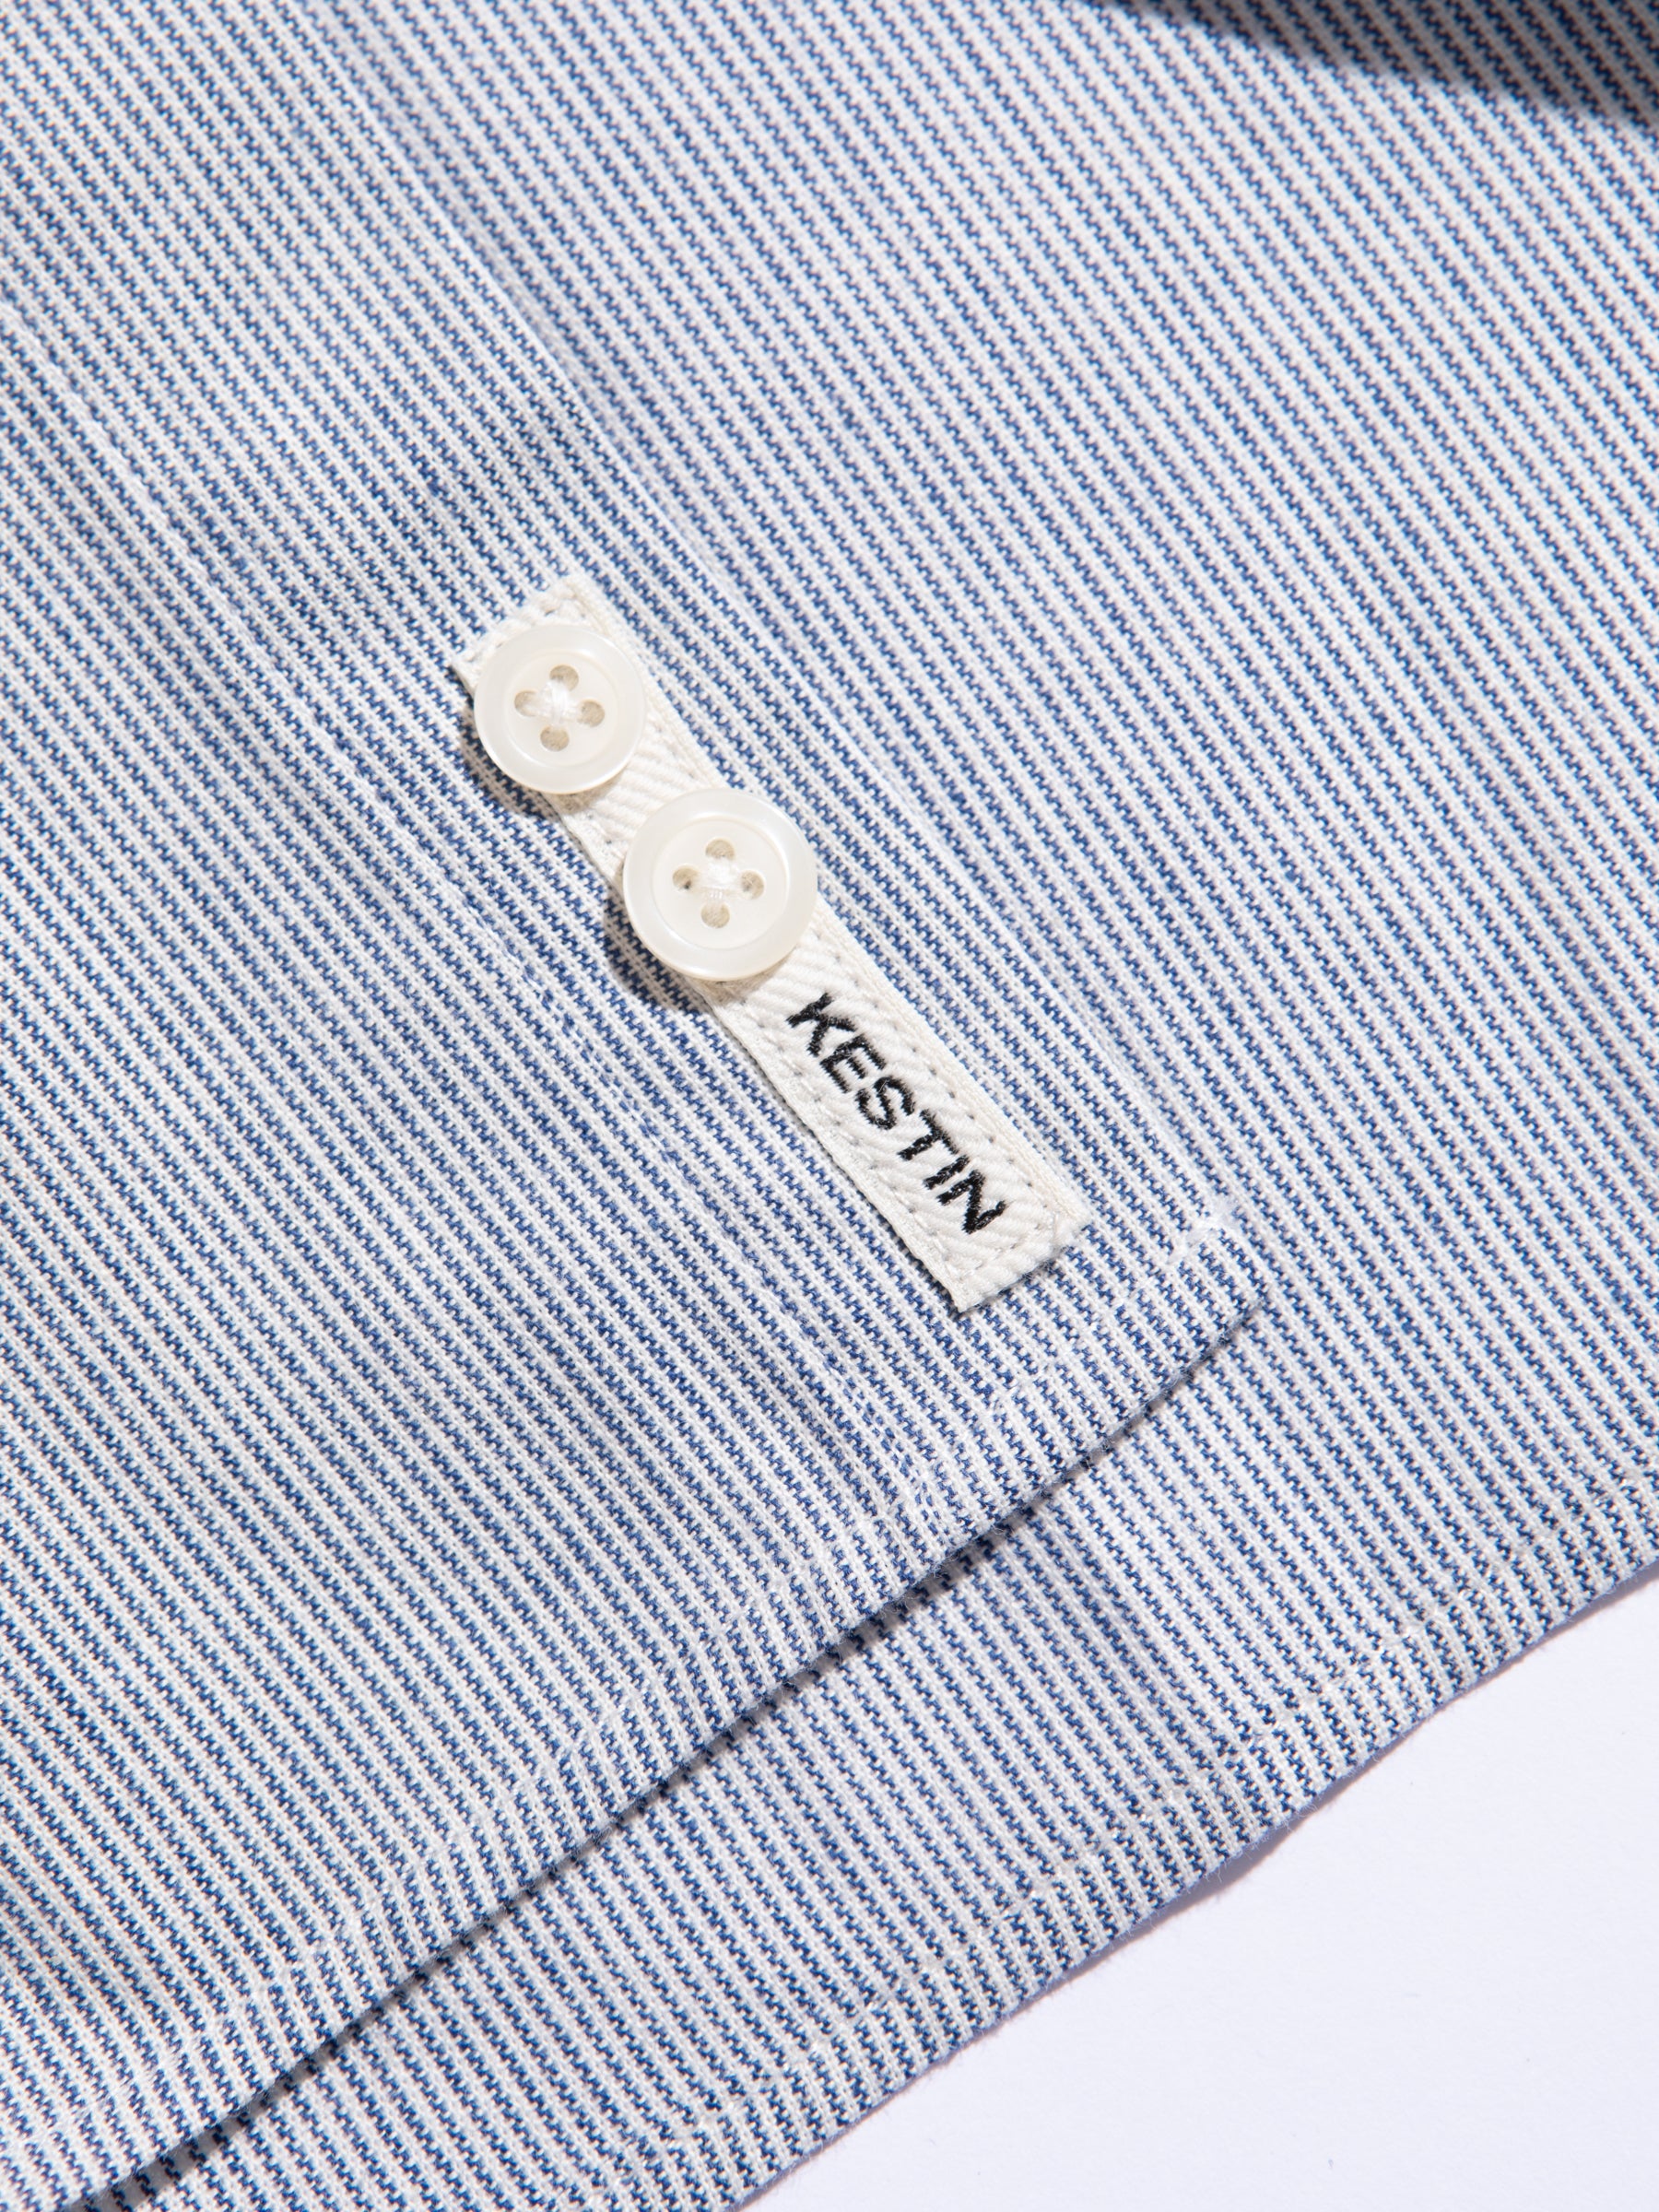 A fine blue and white stripe, used for the AW23 Raeburn Shirt by KESTIN.